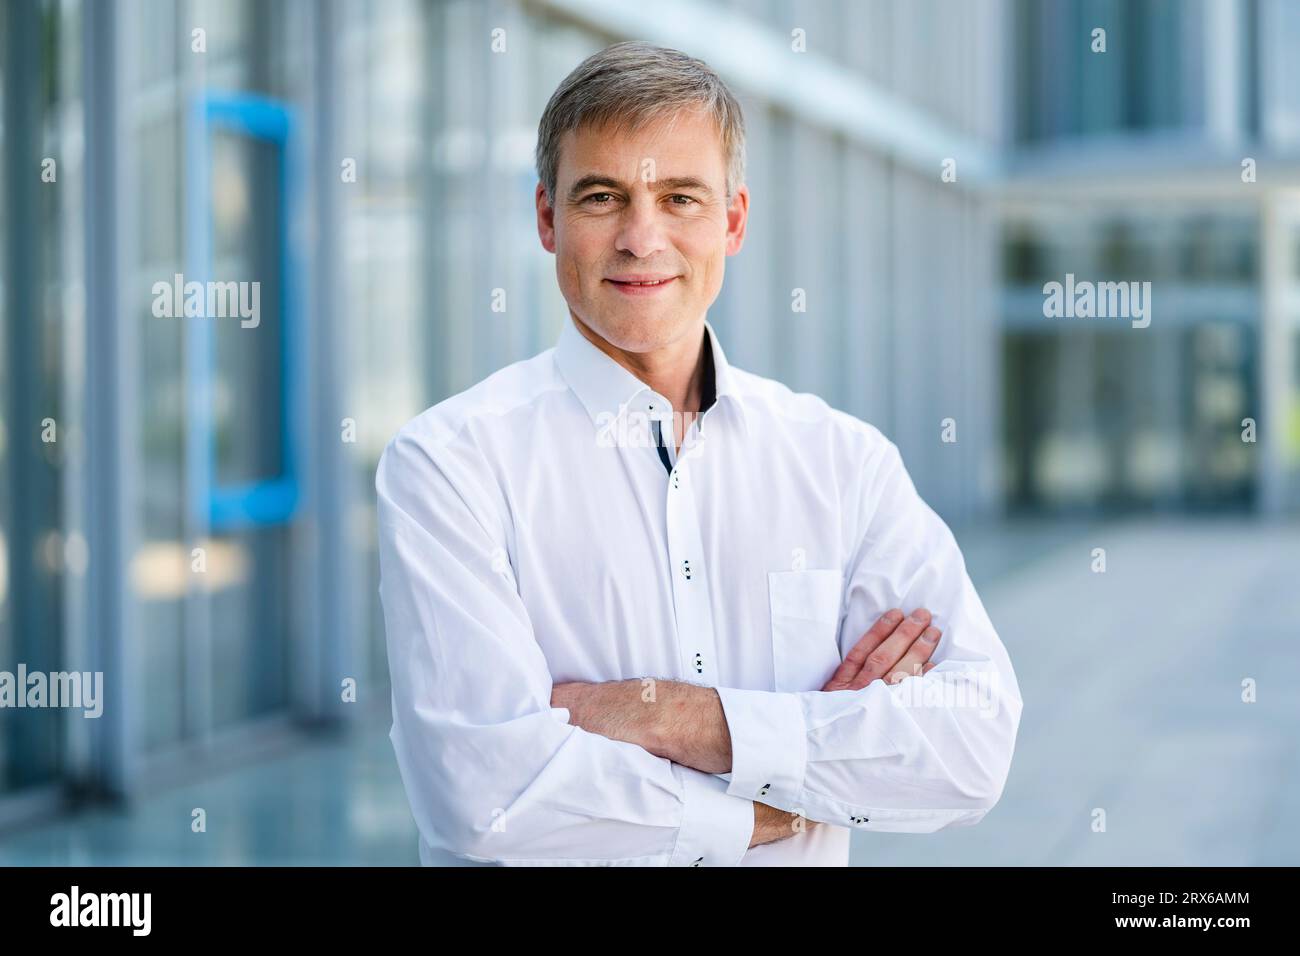 Casual businessman standing in front of office building with arms crossed Stock Photo